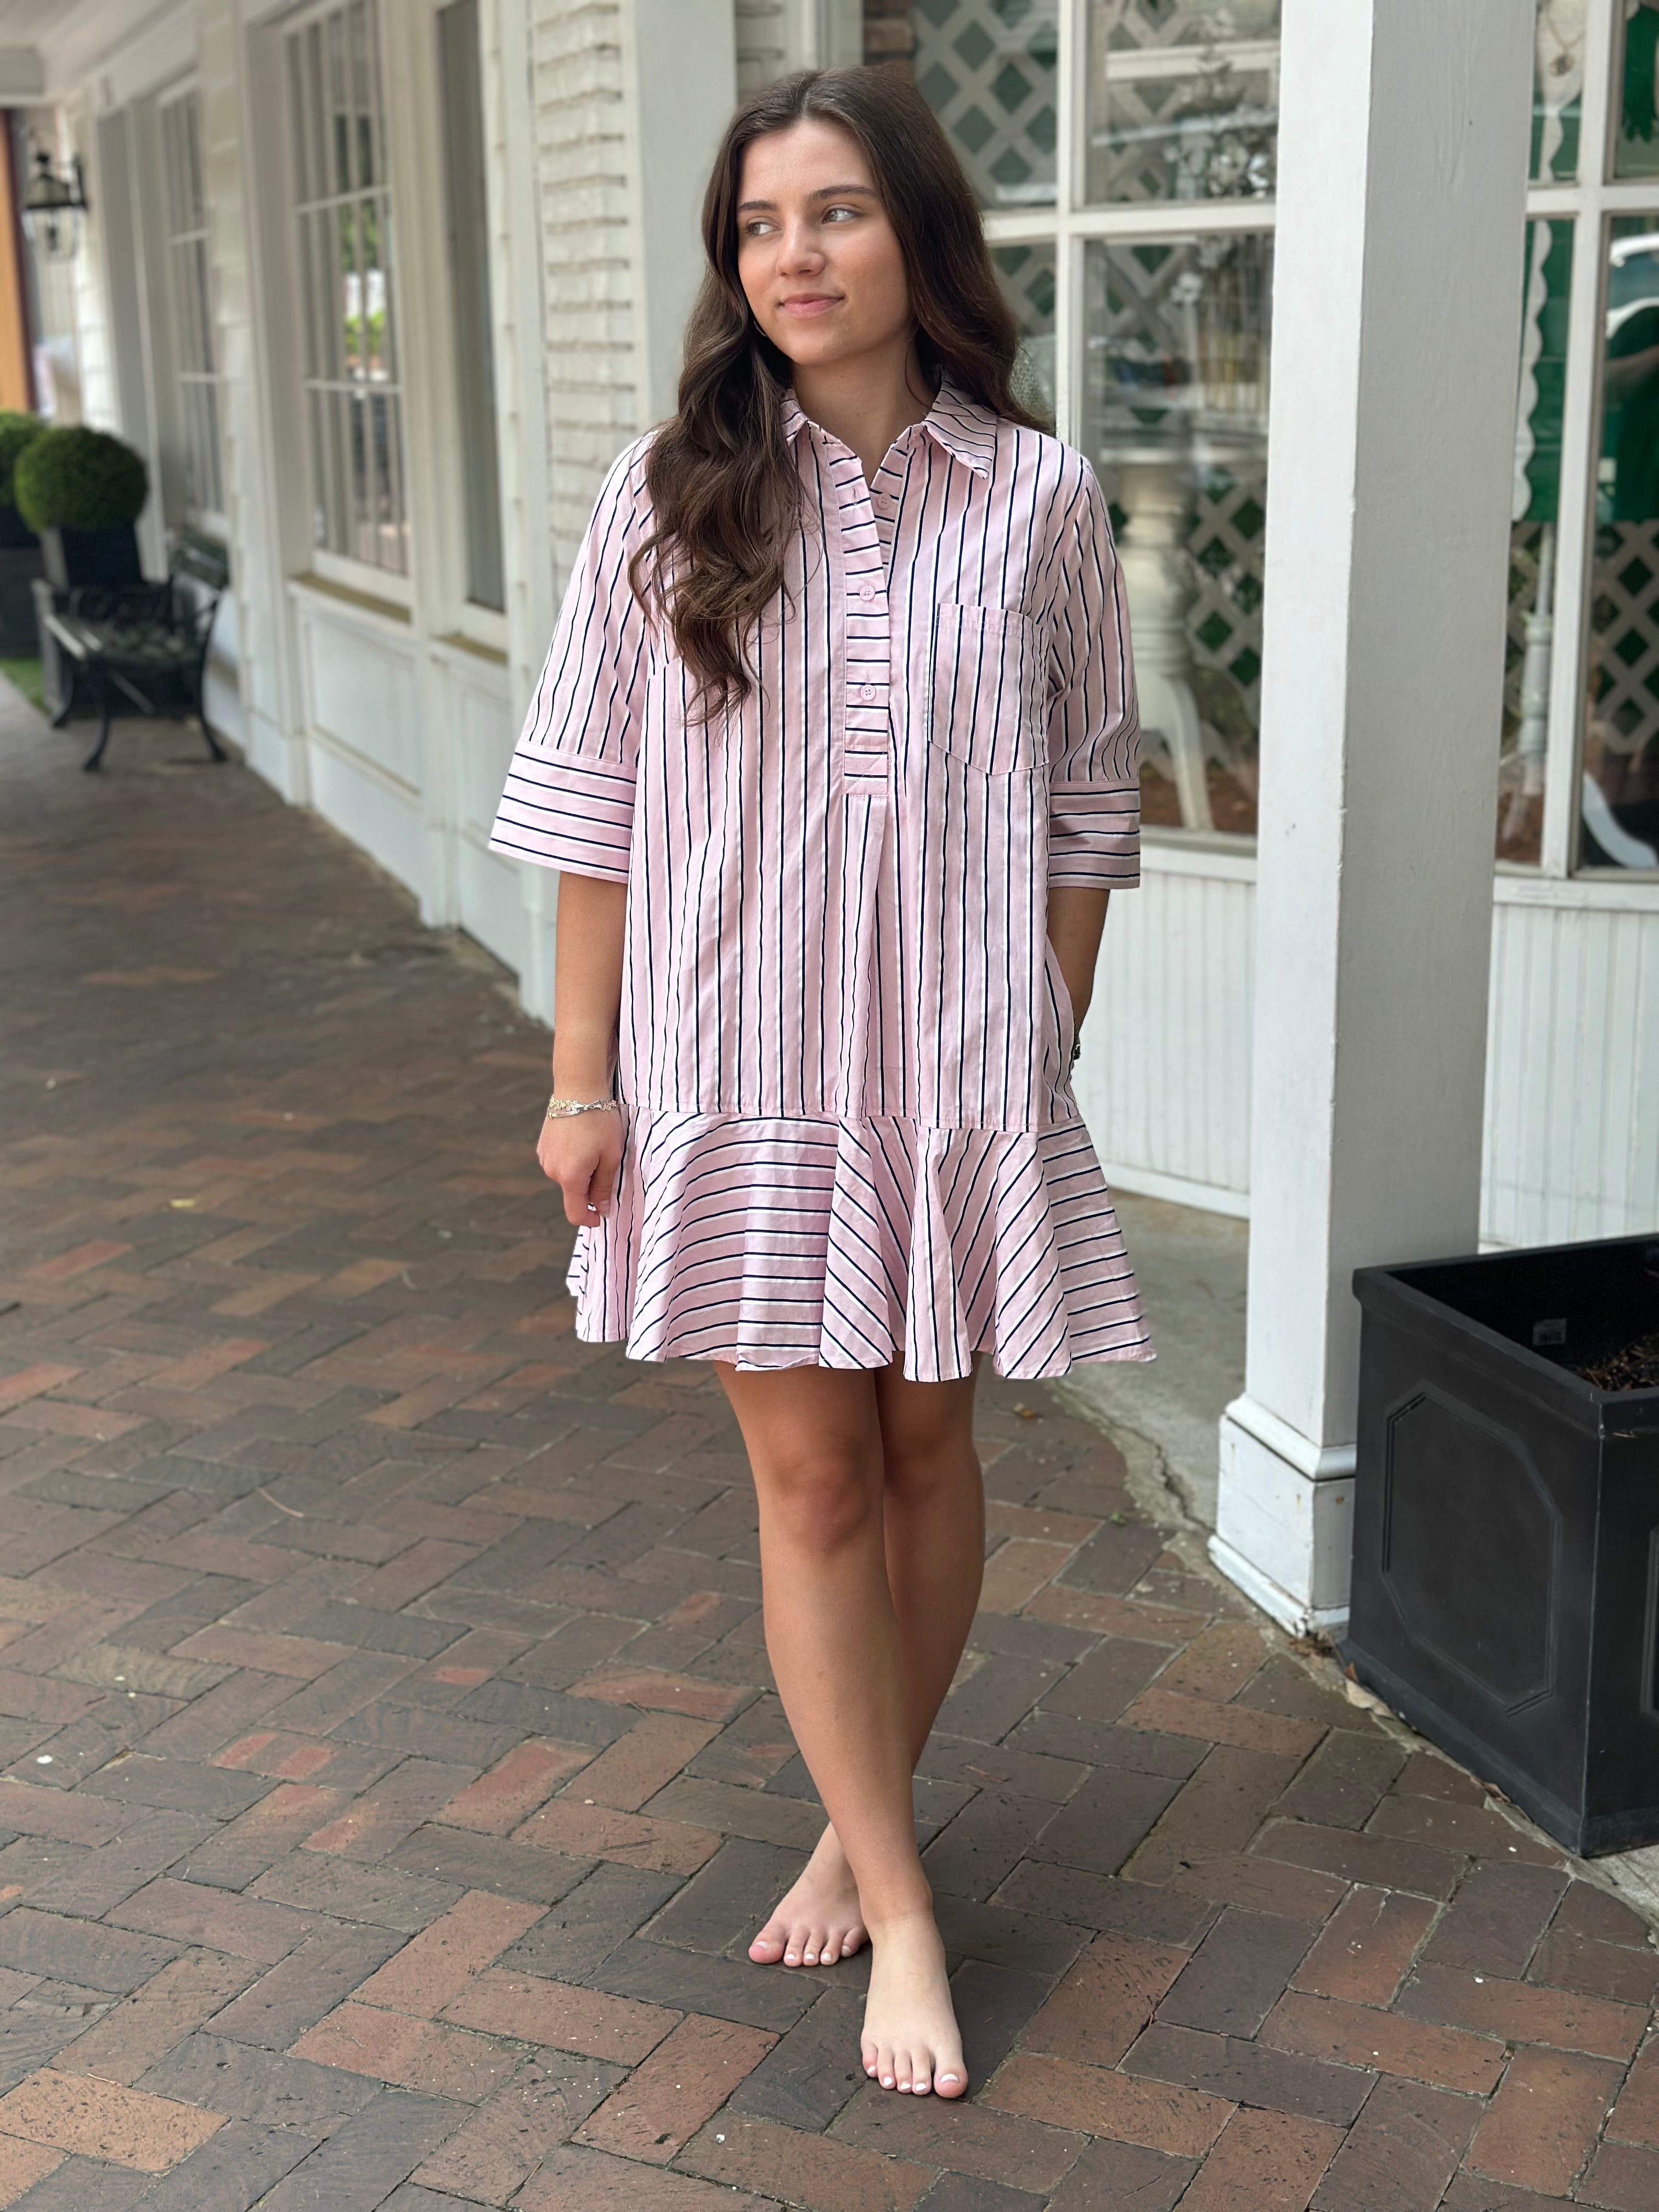 The All Day Everyday Dress - Light Pink